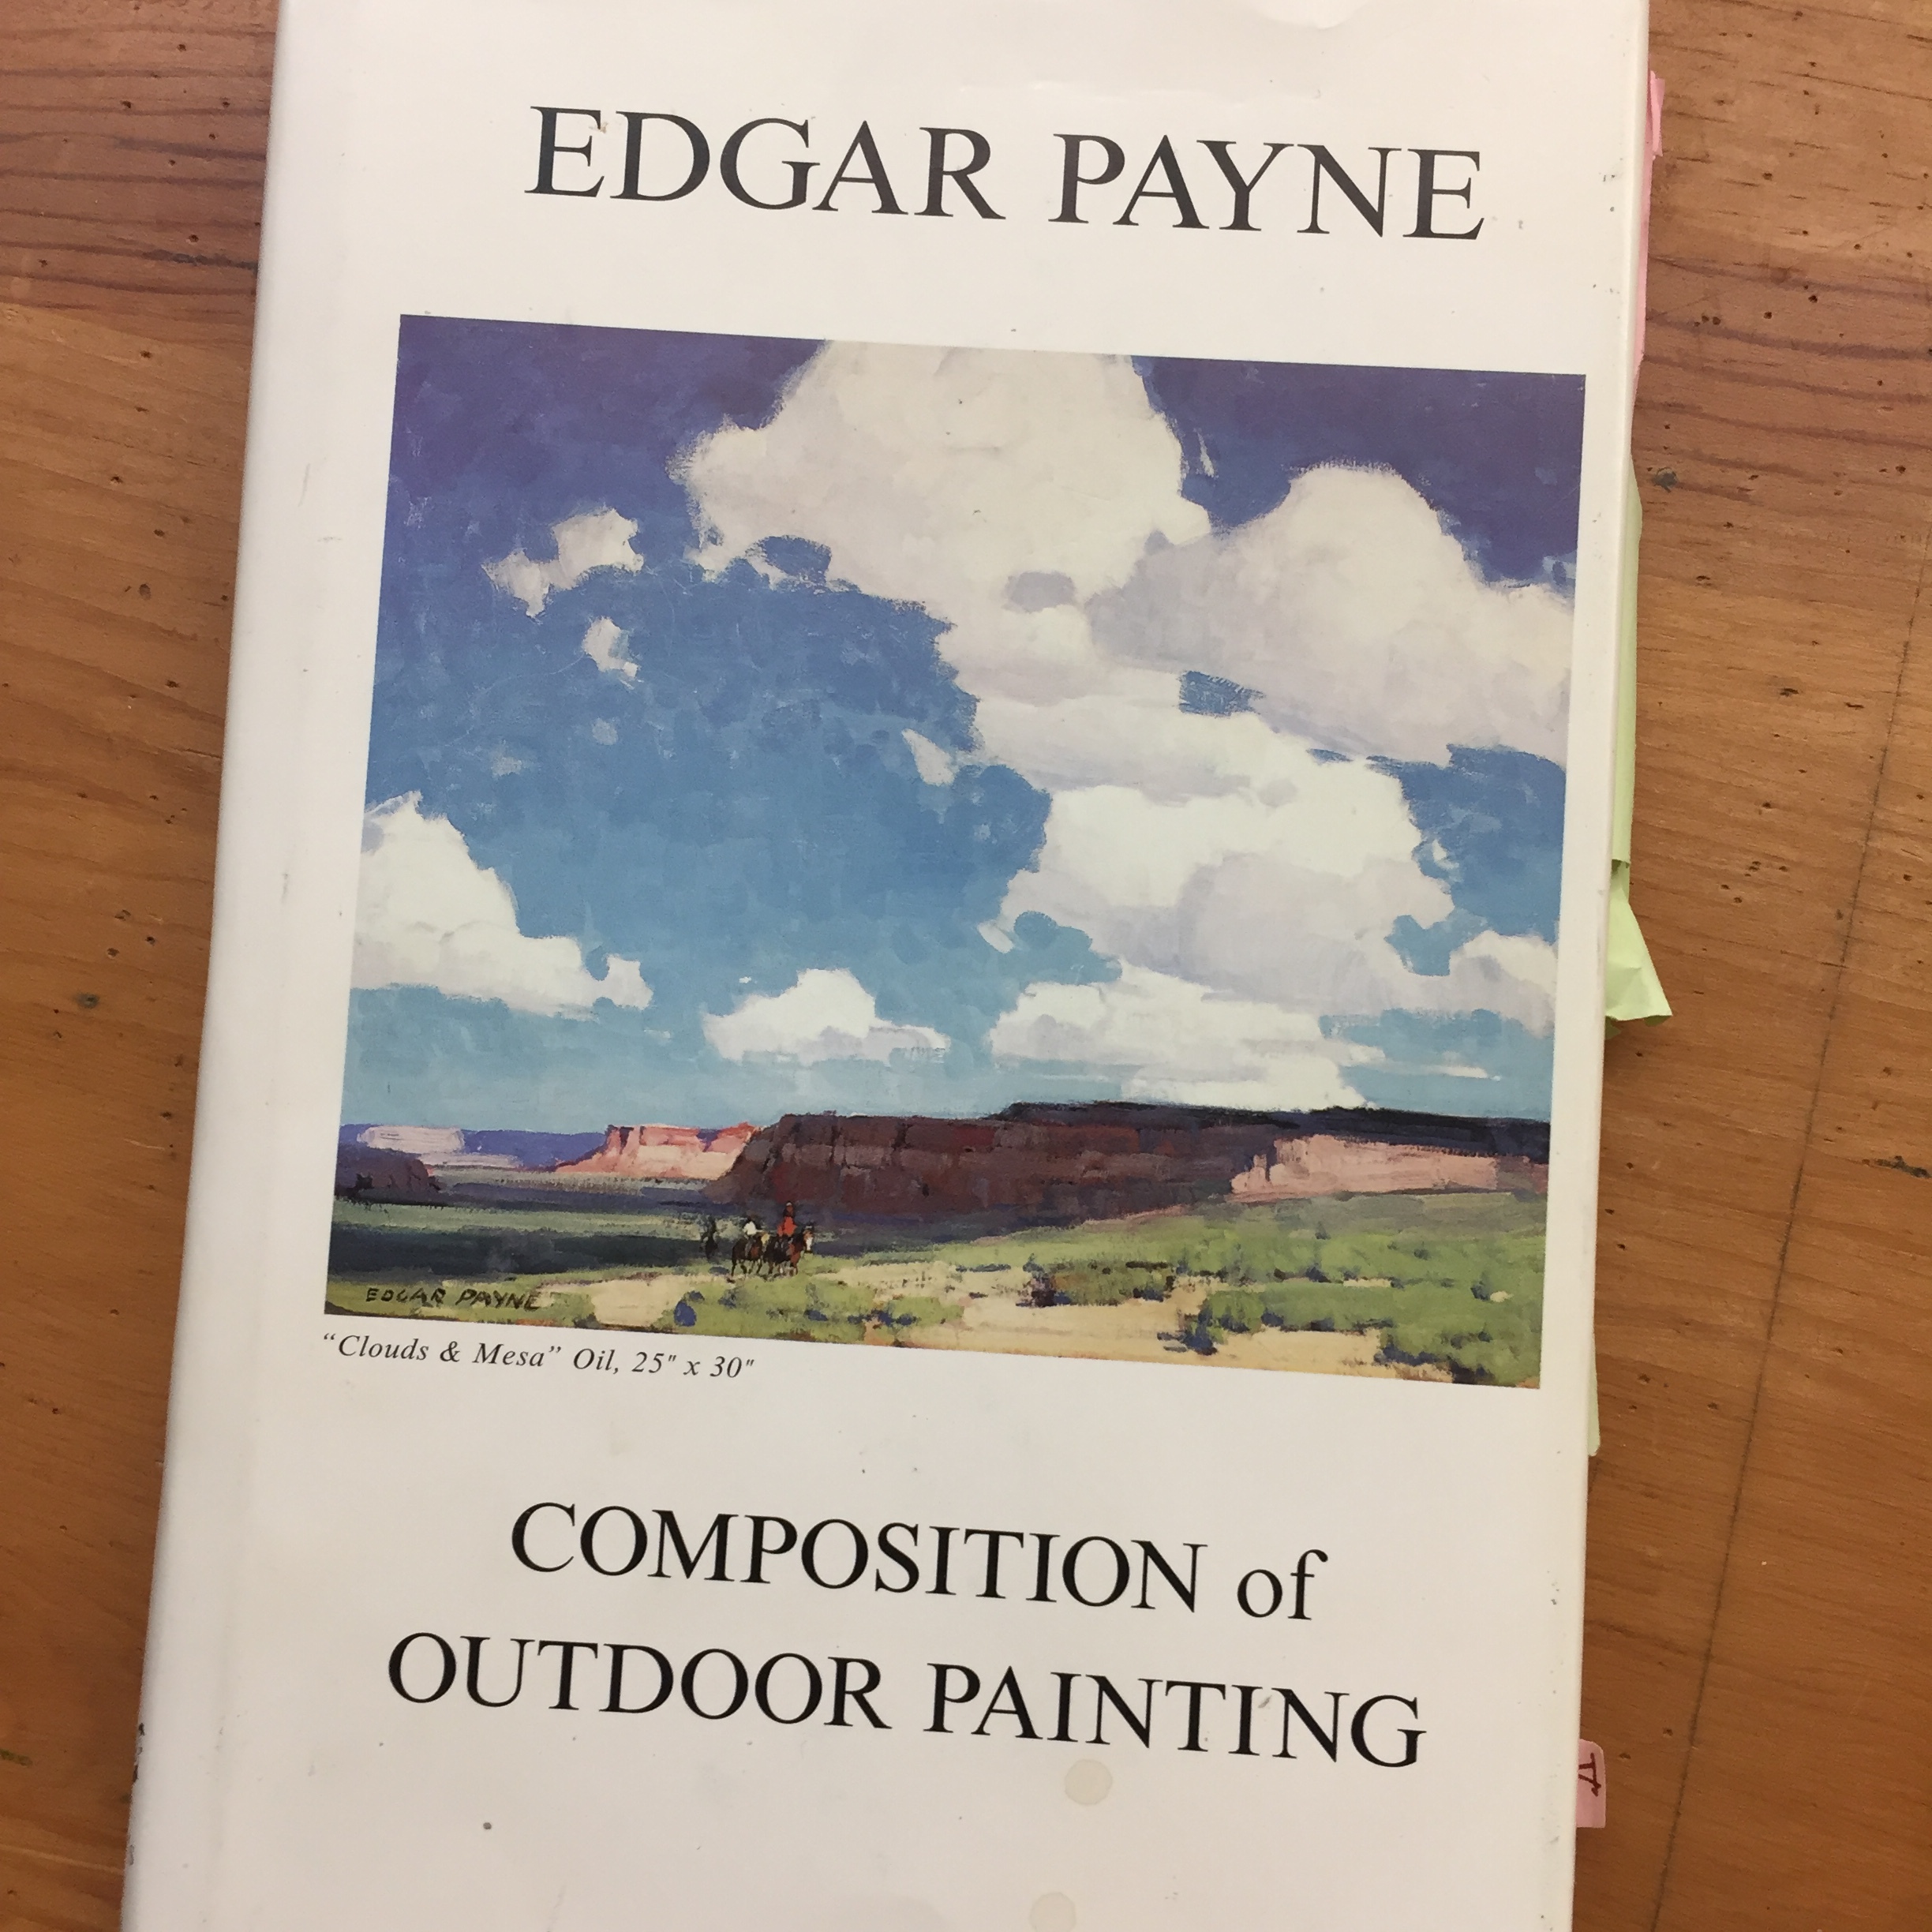 Edgar Payne's Composition of Outdoor Painting